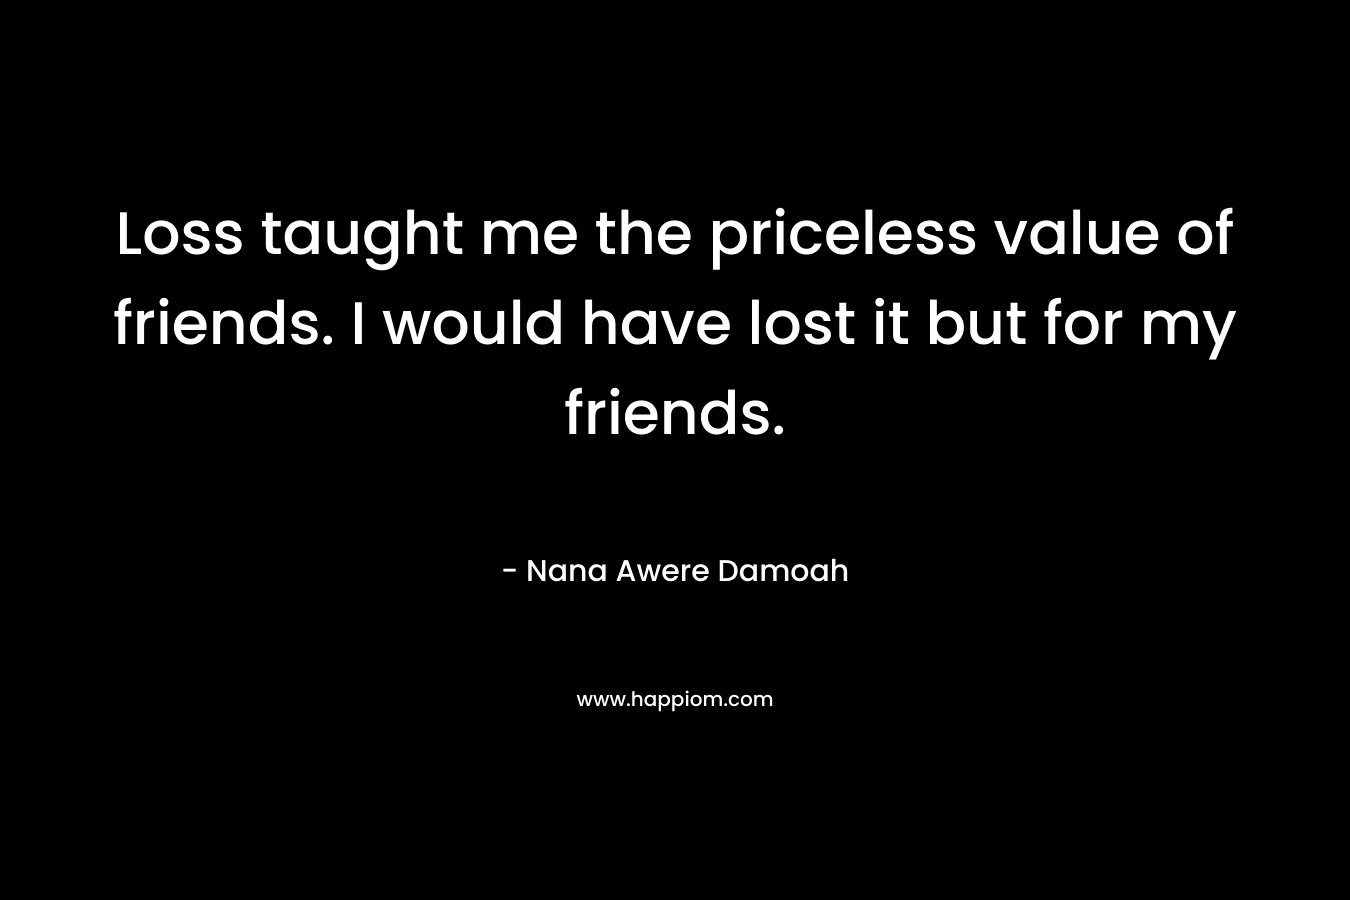 Loss taught me the priceless value of friends. I would have lost it but for my friends.